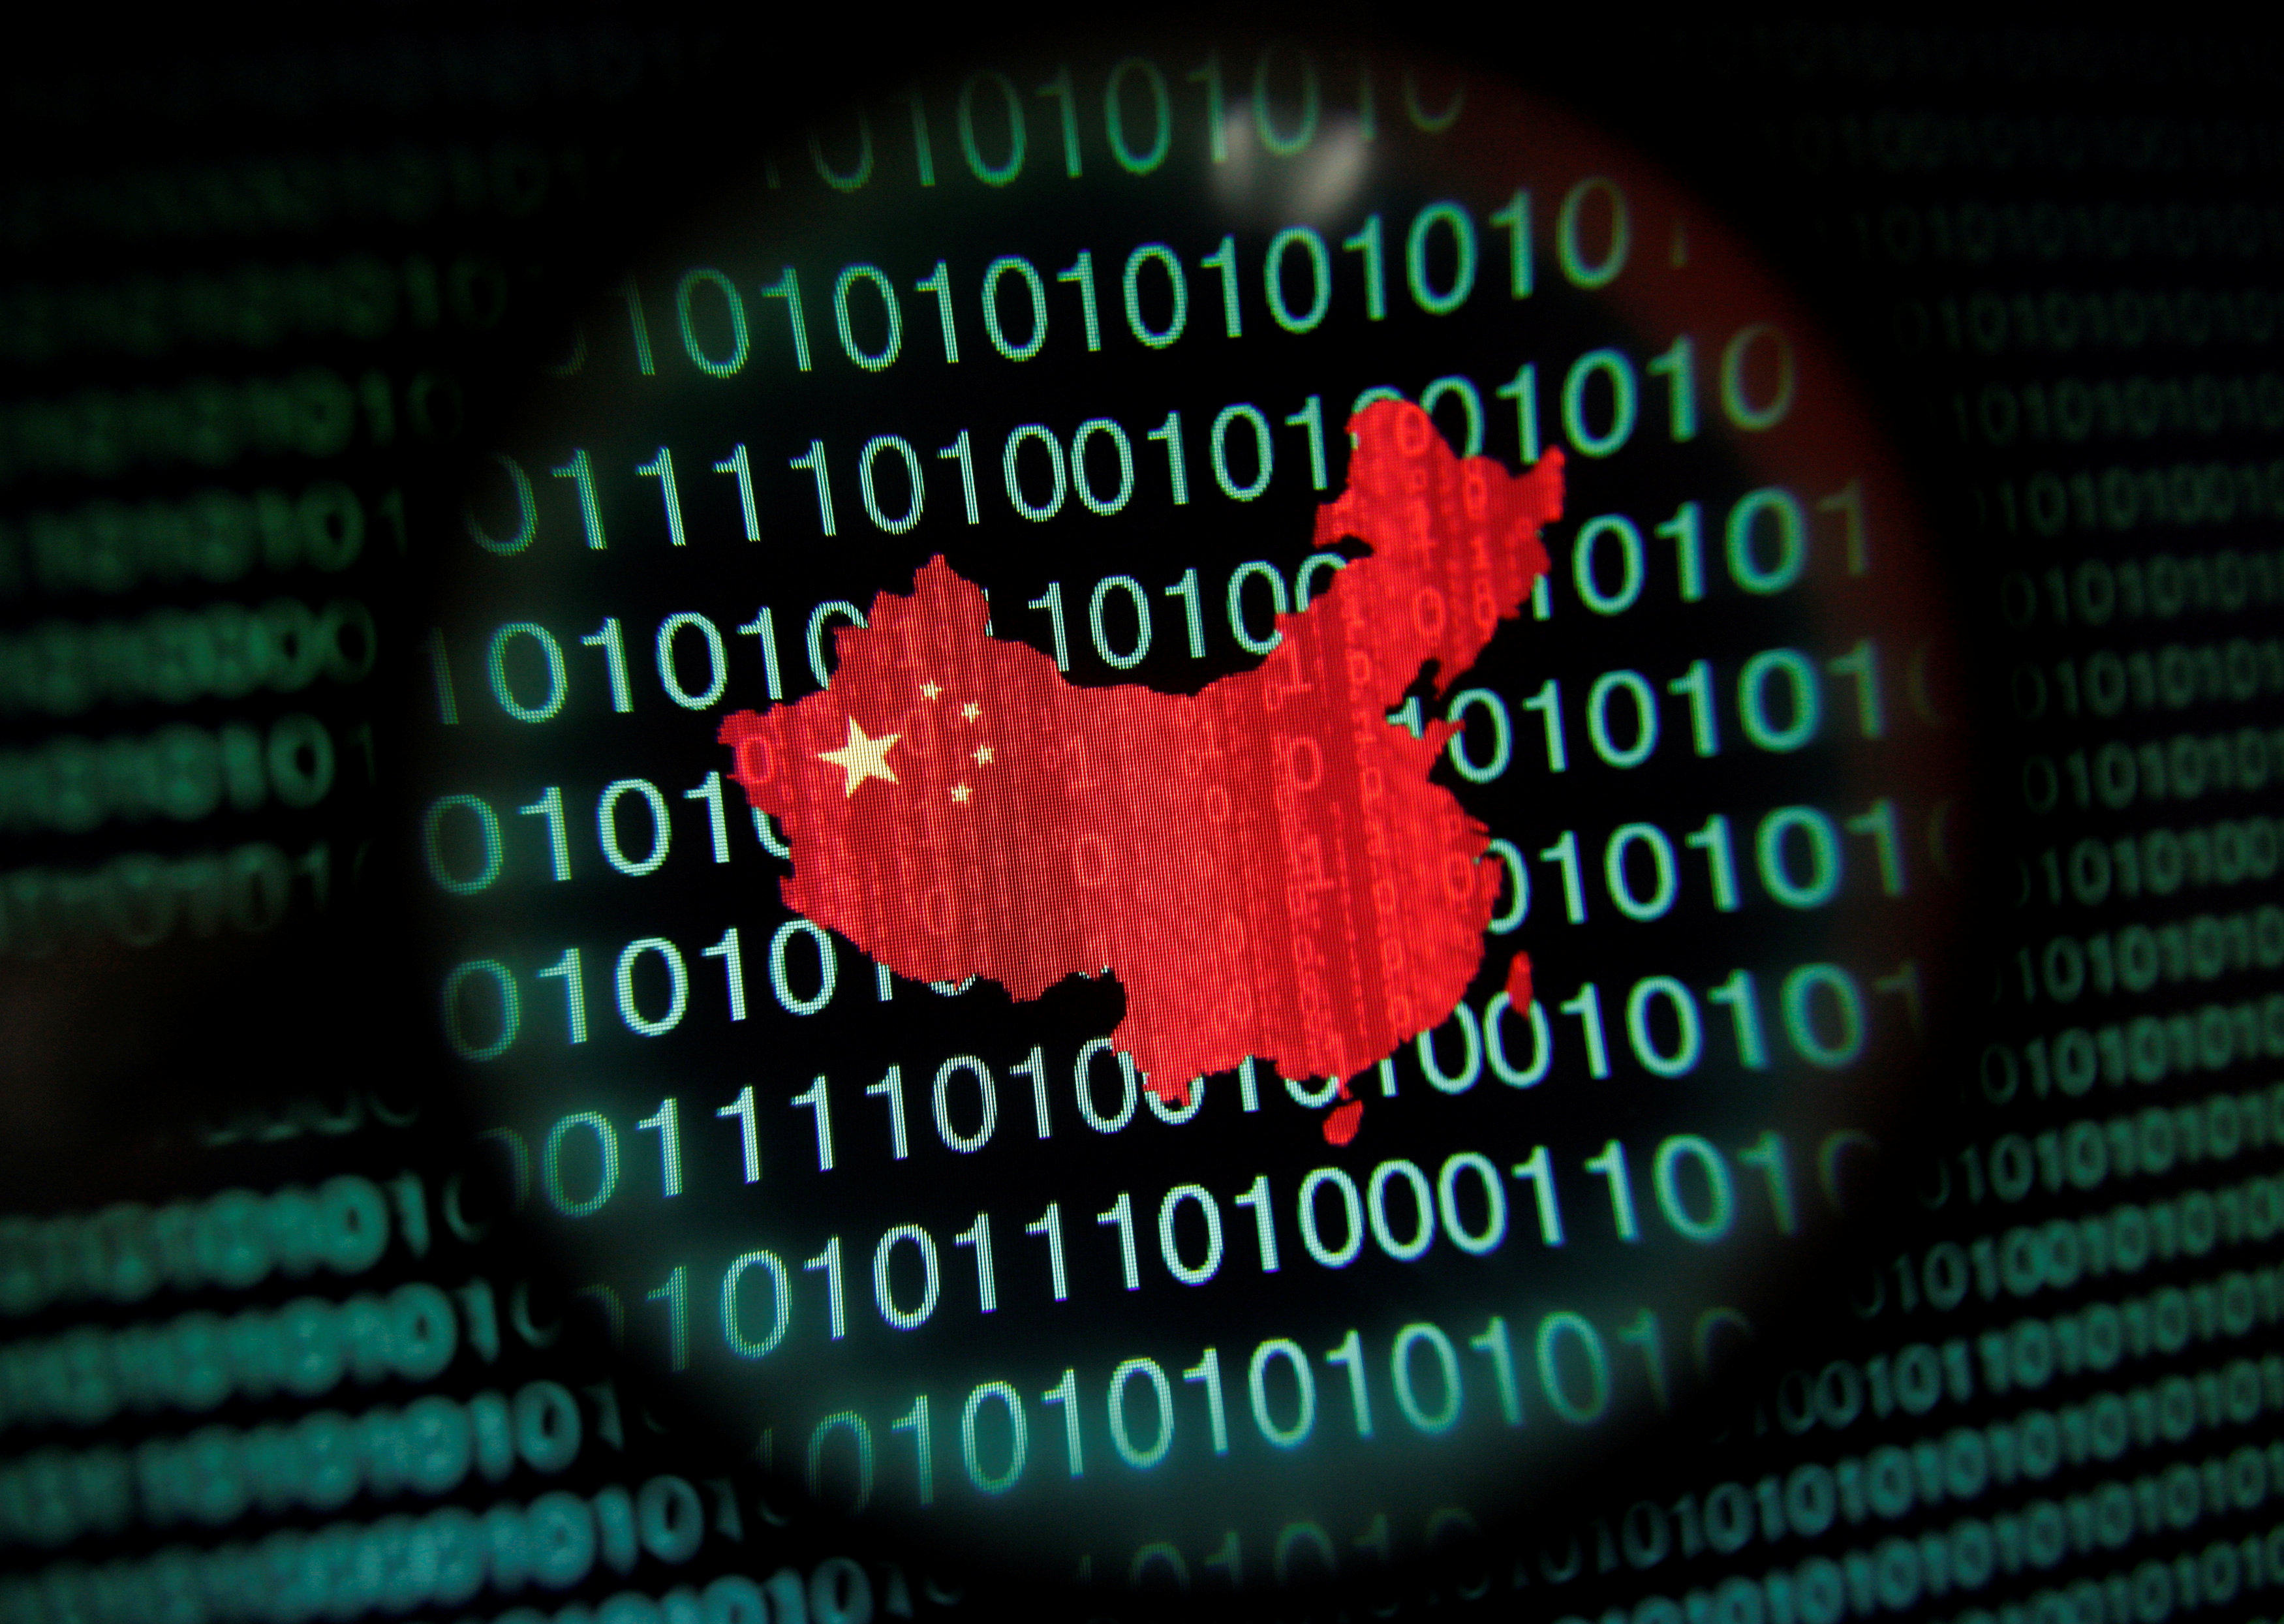 While Chinese hackers are known to spy on Western countries, this is one of the largest known cyber-espionage campaigns against American critical infrastructure. Photo illustration: Reuters